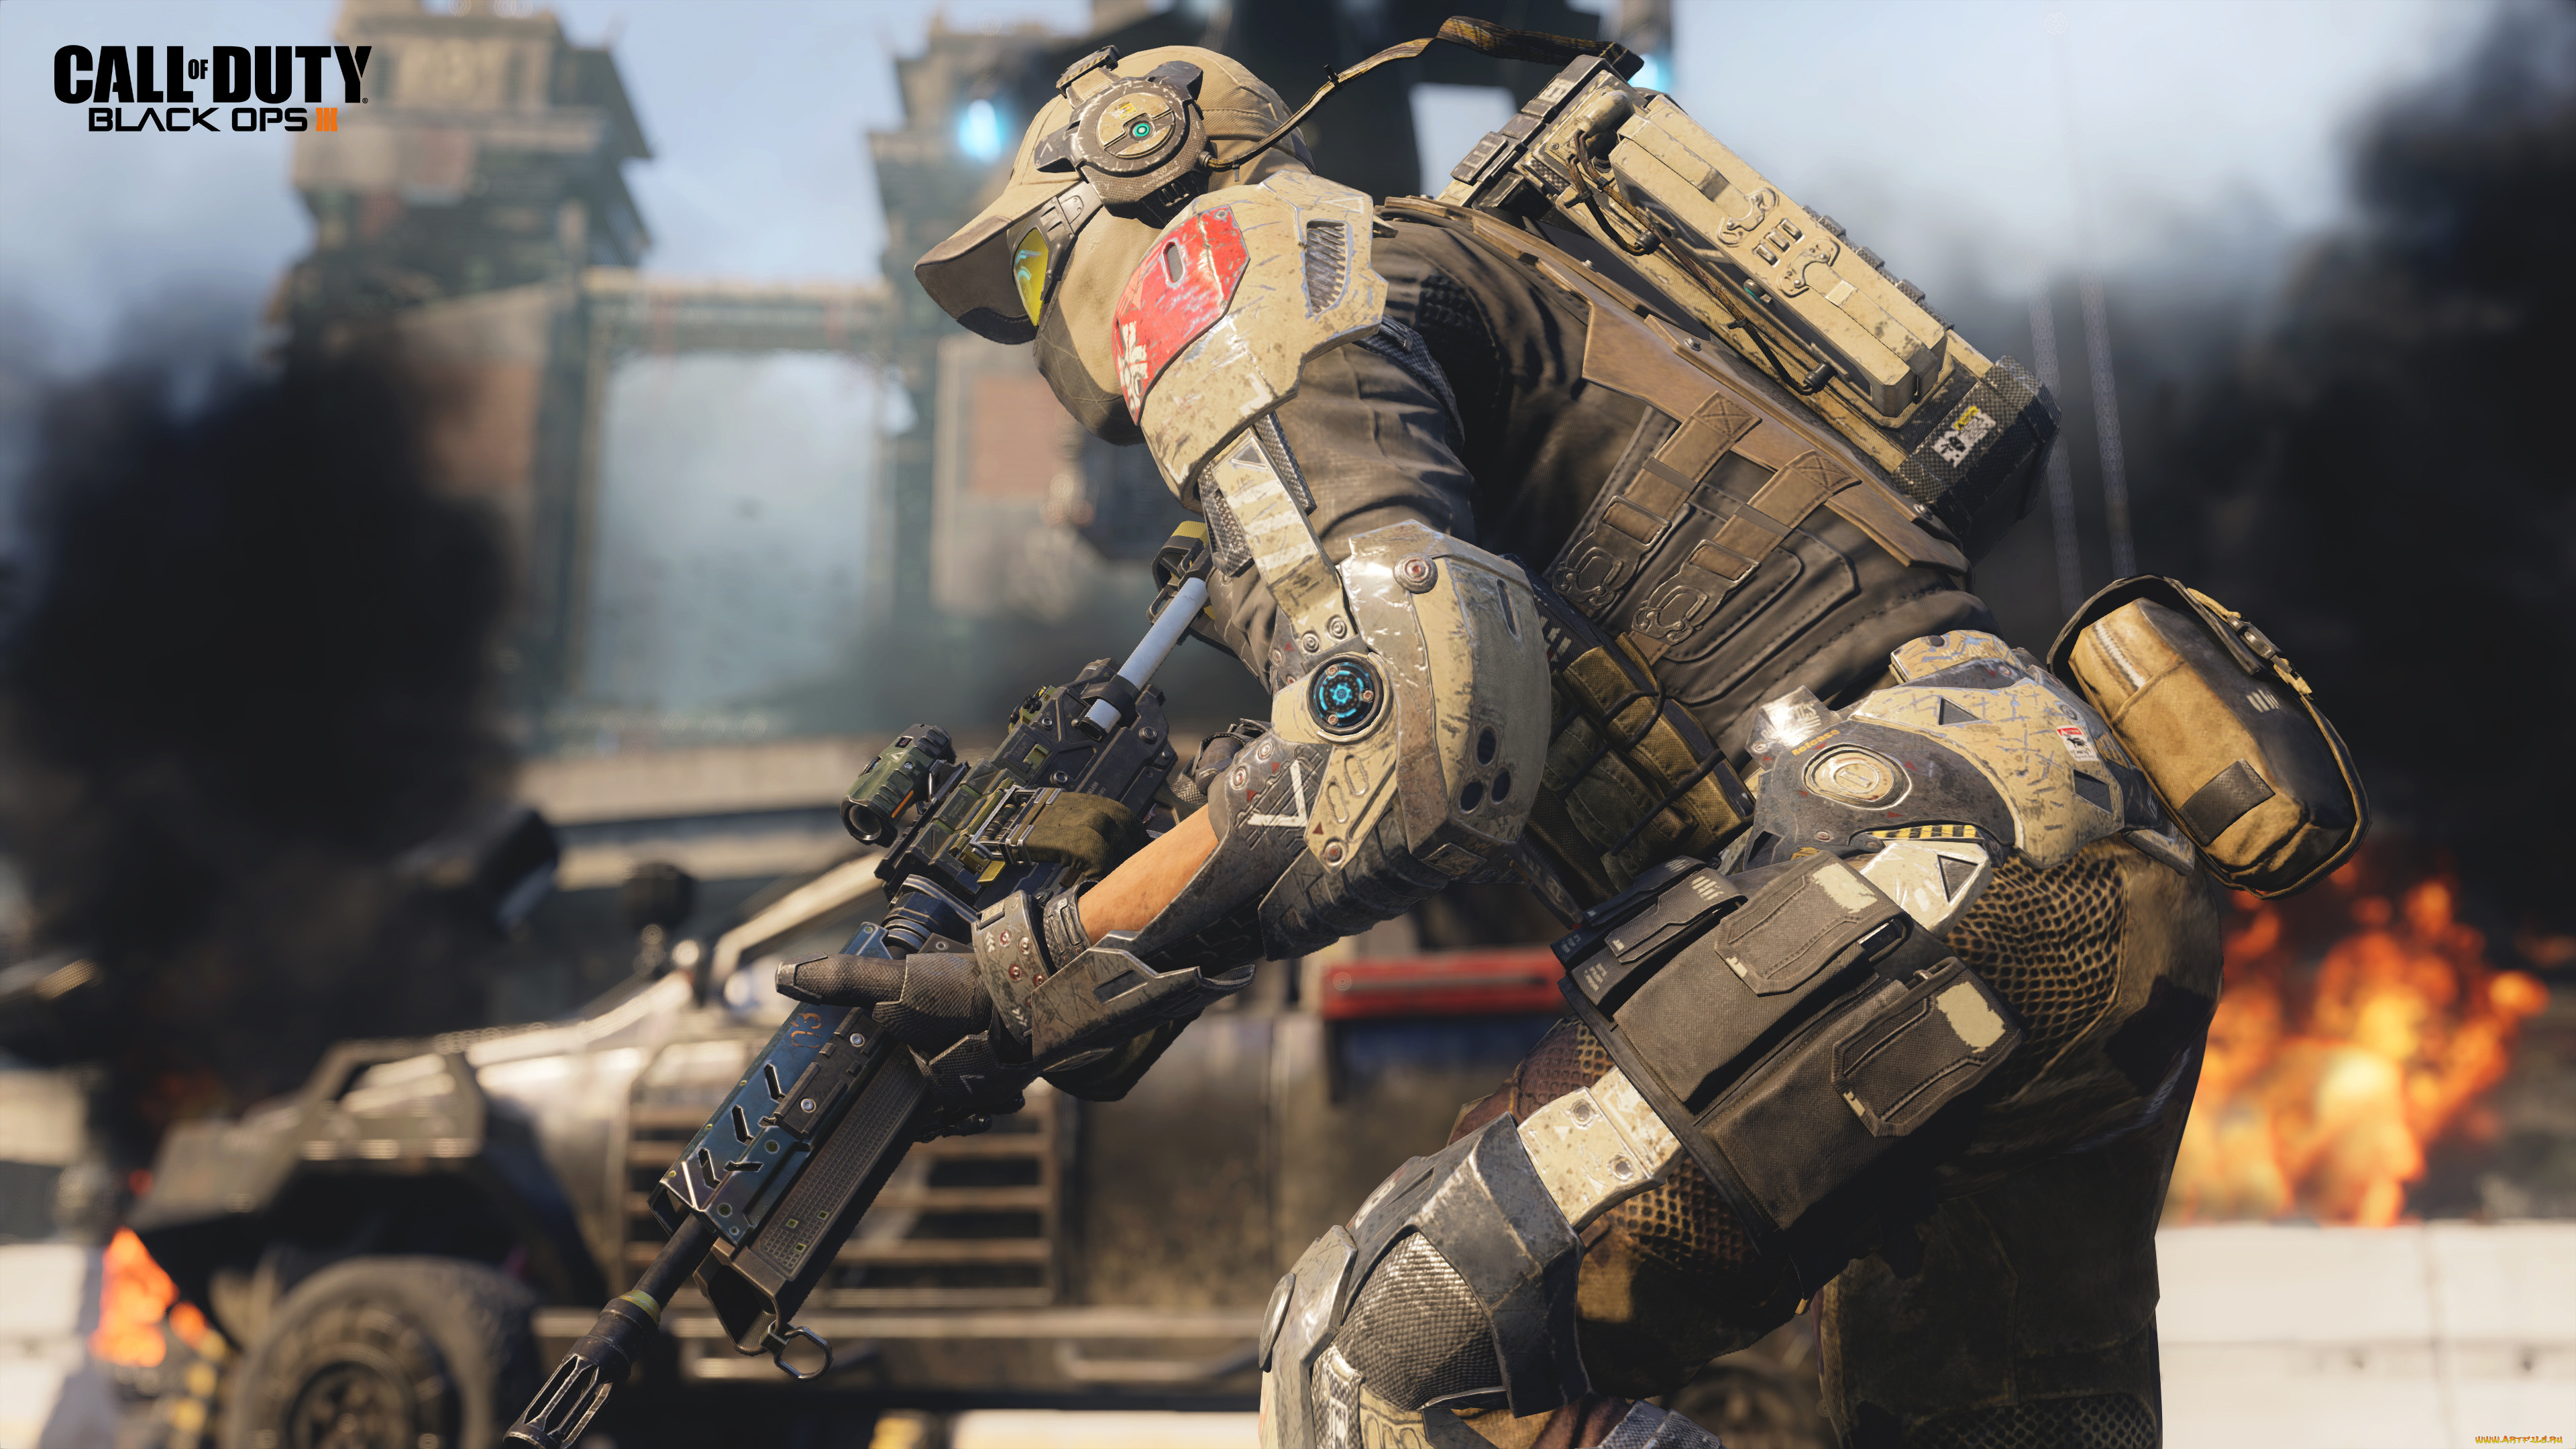  , call of duty,  black ops iii, action, , , , , black, ops, 3, call, of, duty